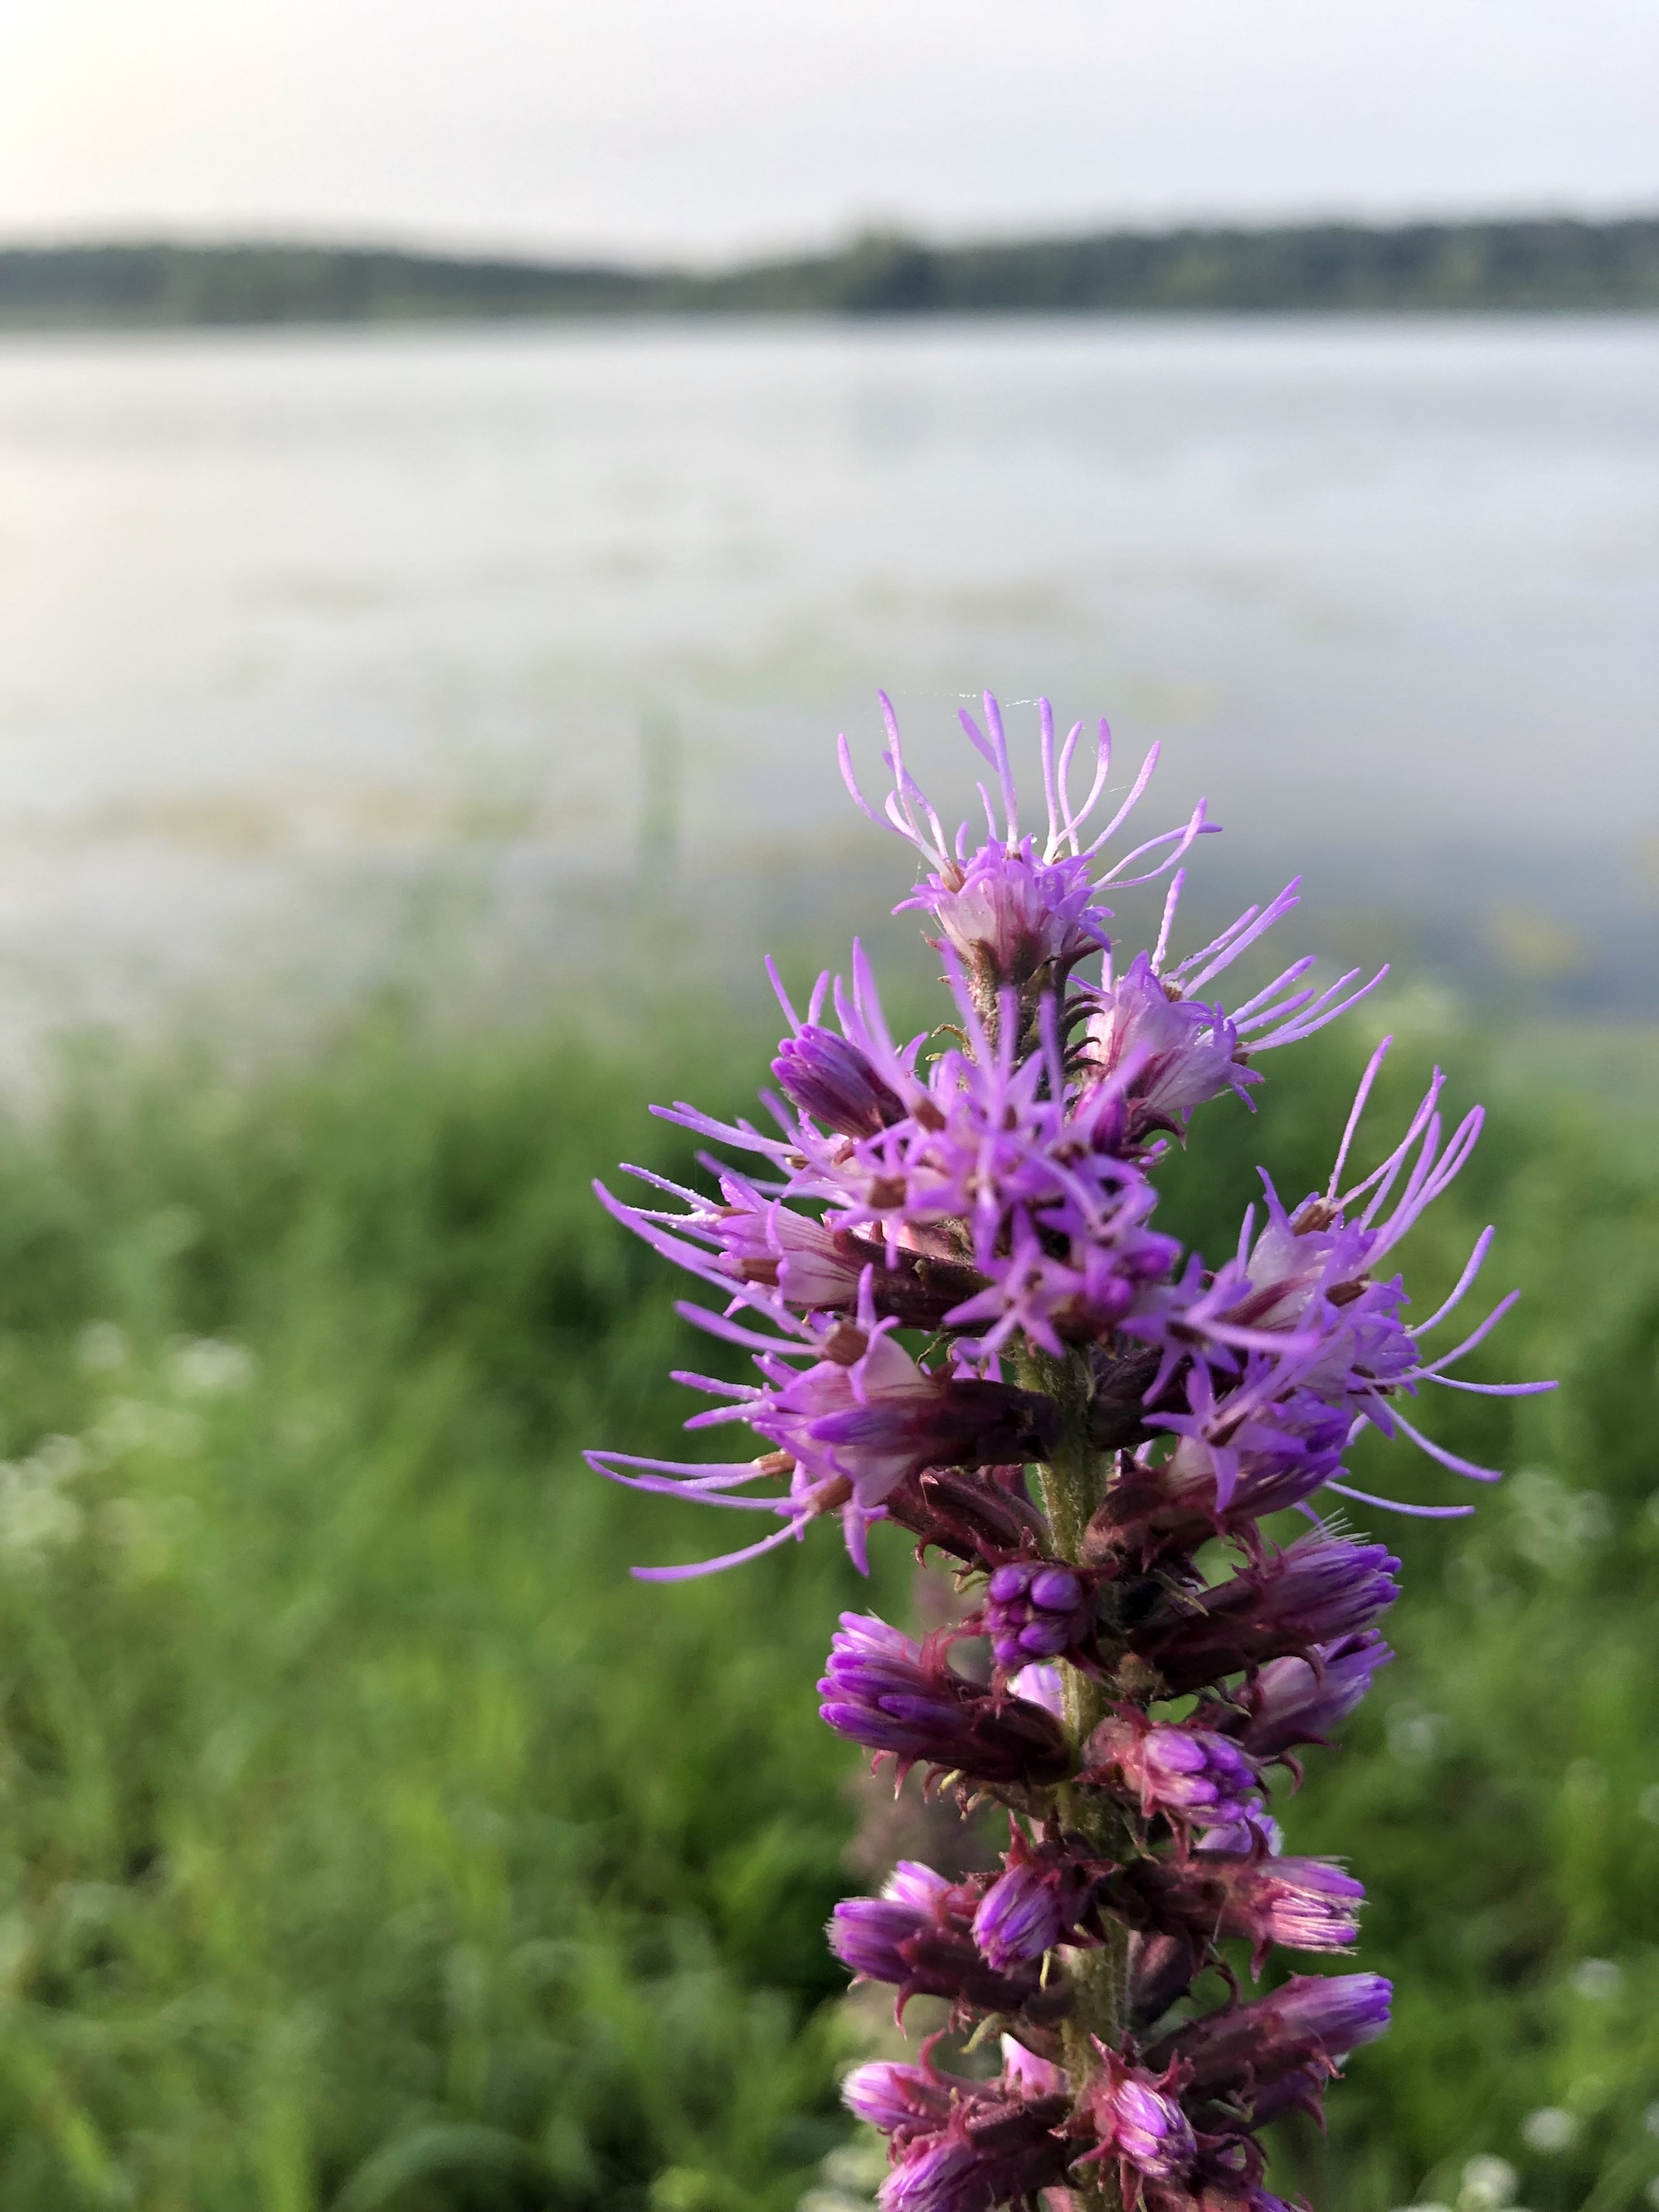 Prairie Blazing Star on the shore of Lake Wingra in Wingra Park in Madison, Wisconsin on July 16, 2021.